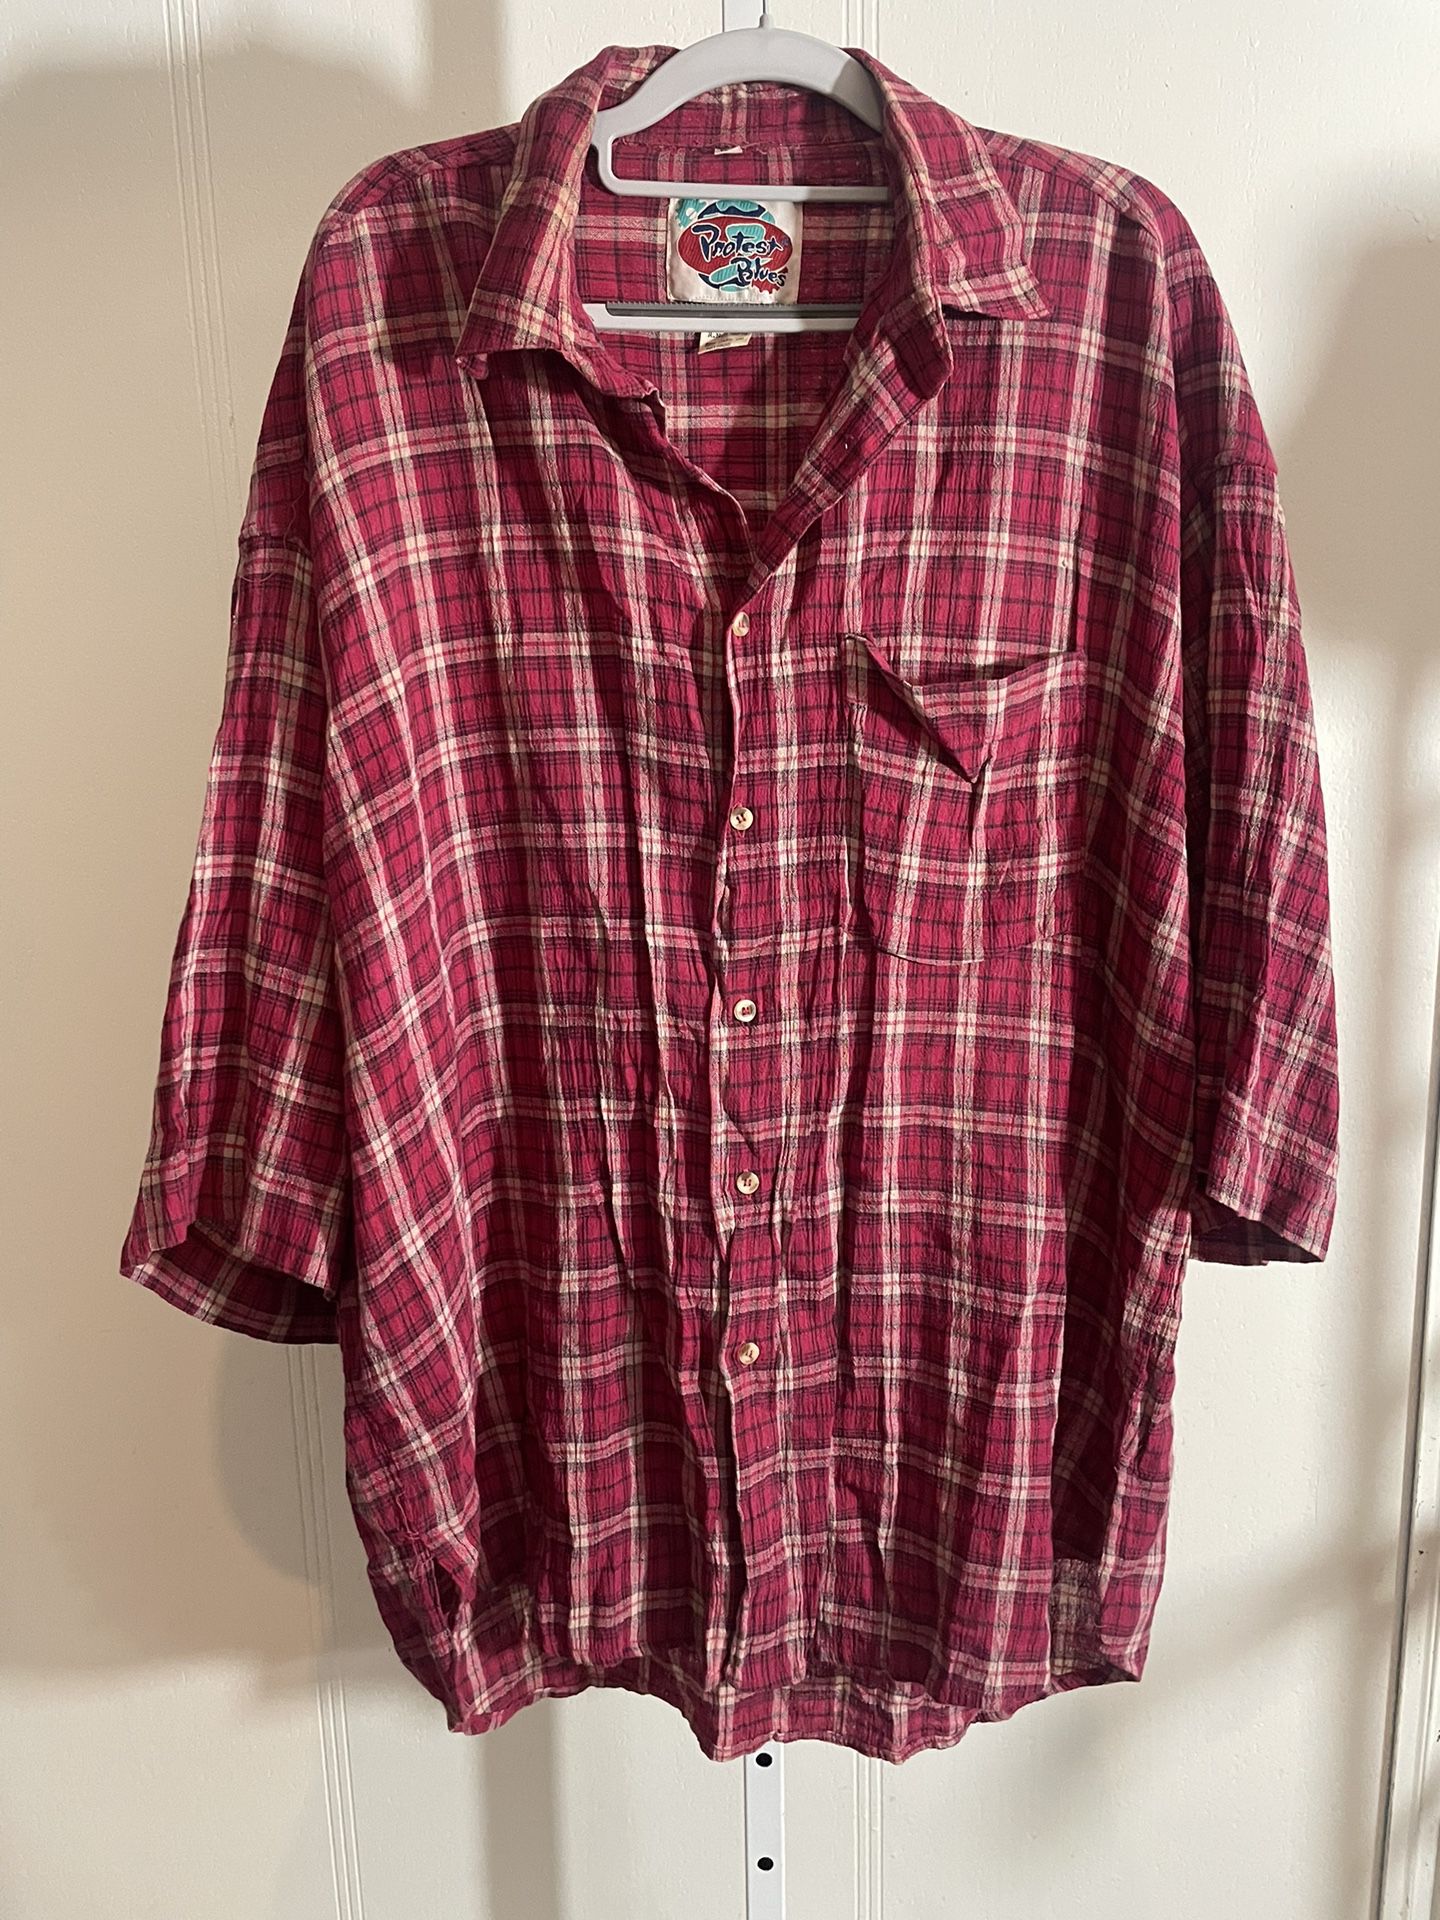 Protest Blues Brand Men’s XL Shirt Faded Red Plaid Flannel Work Casual